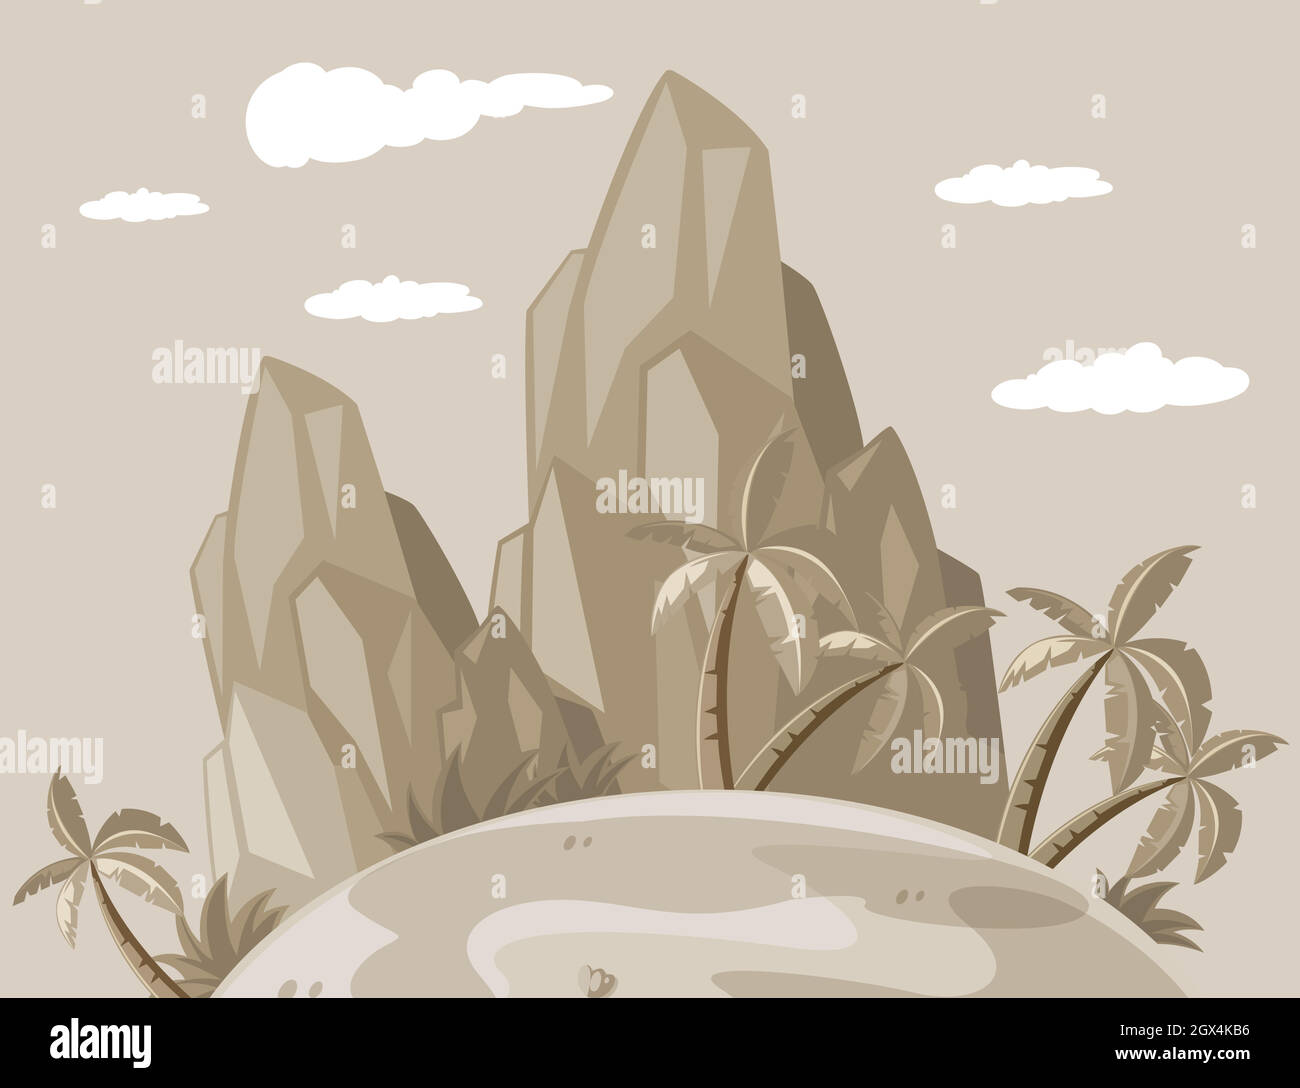 Island view in grayscale Stock Vector